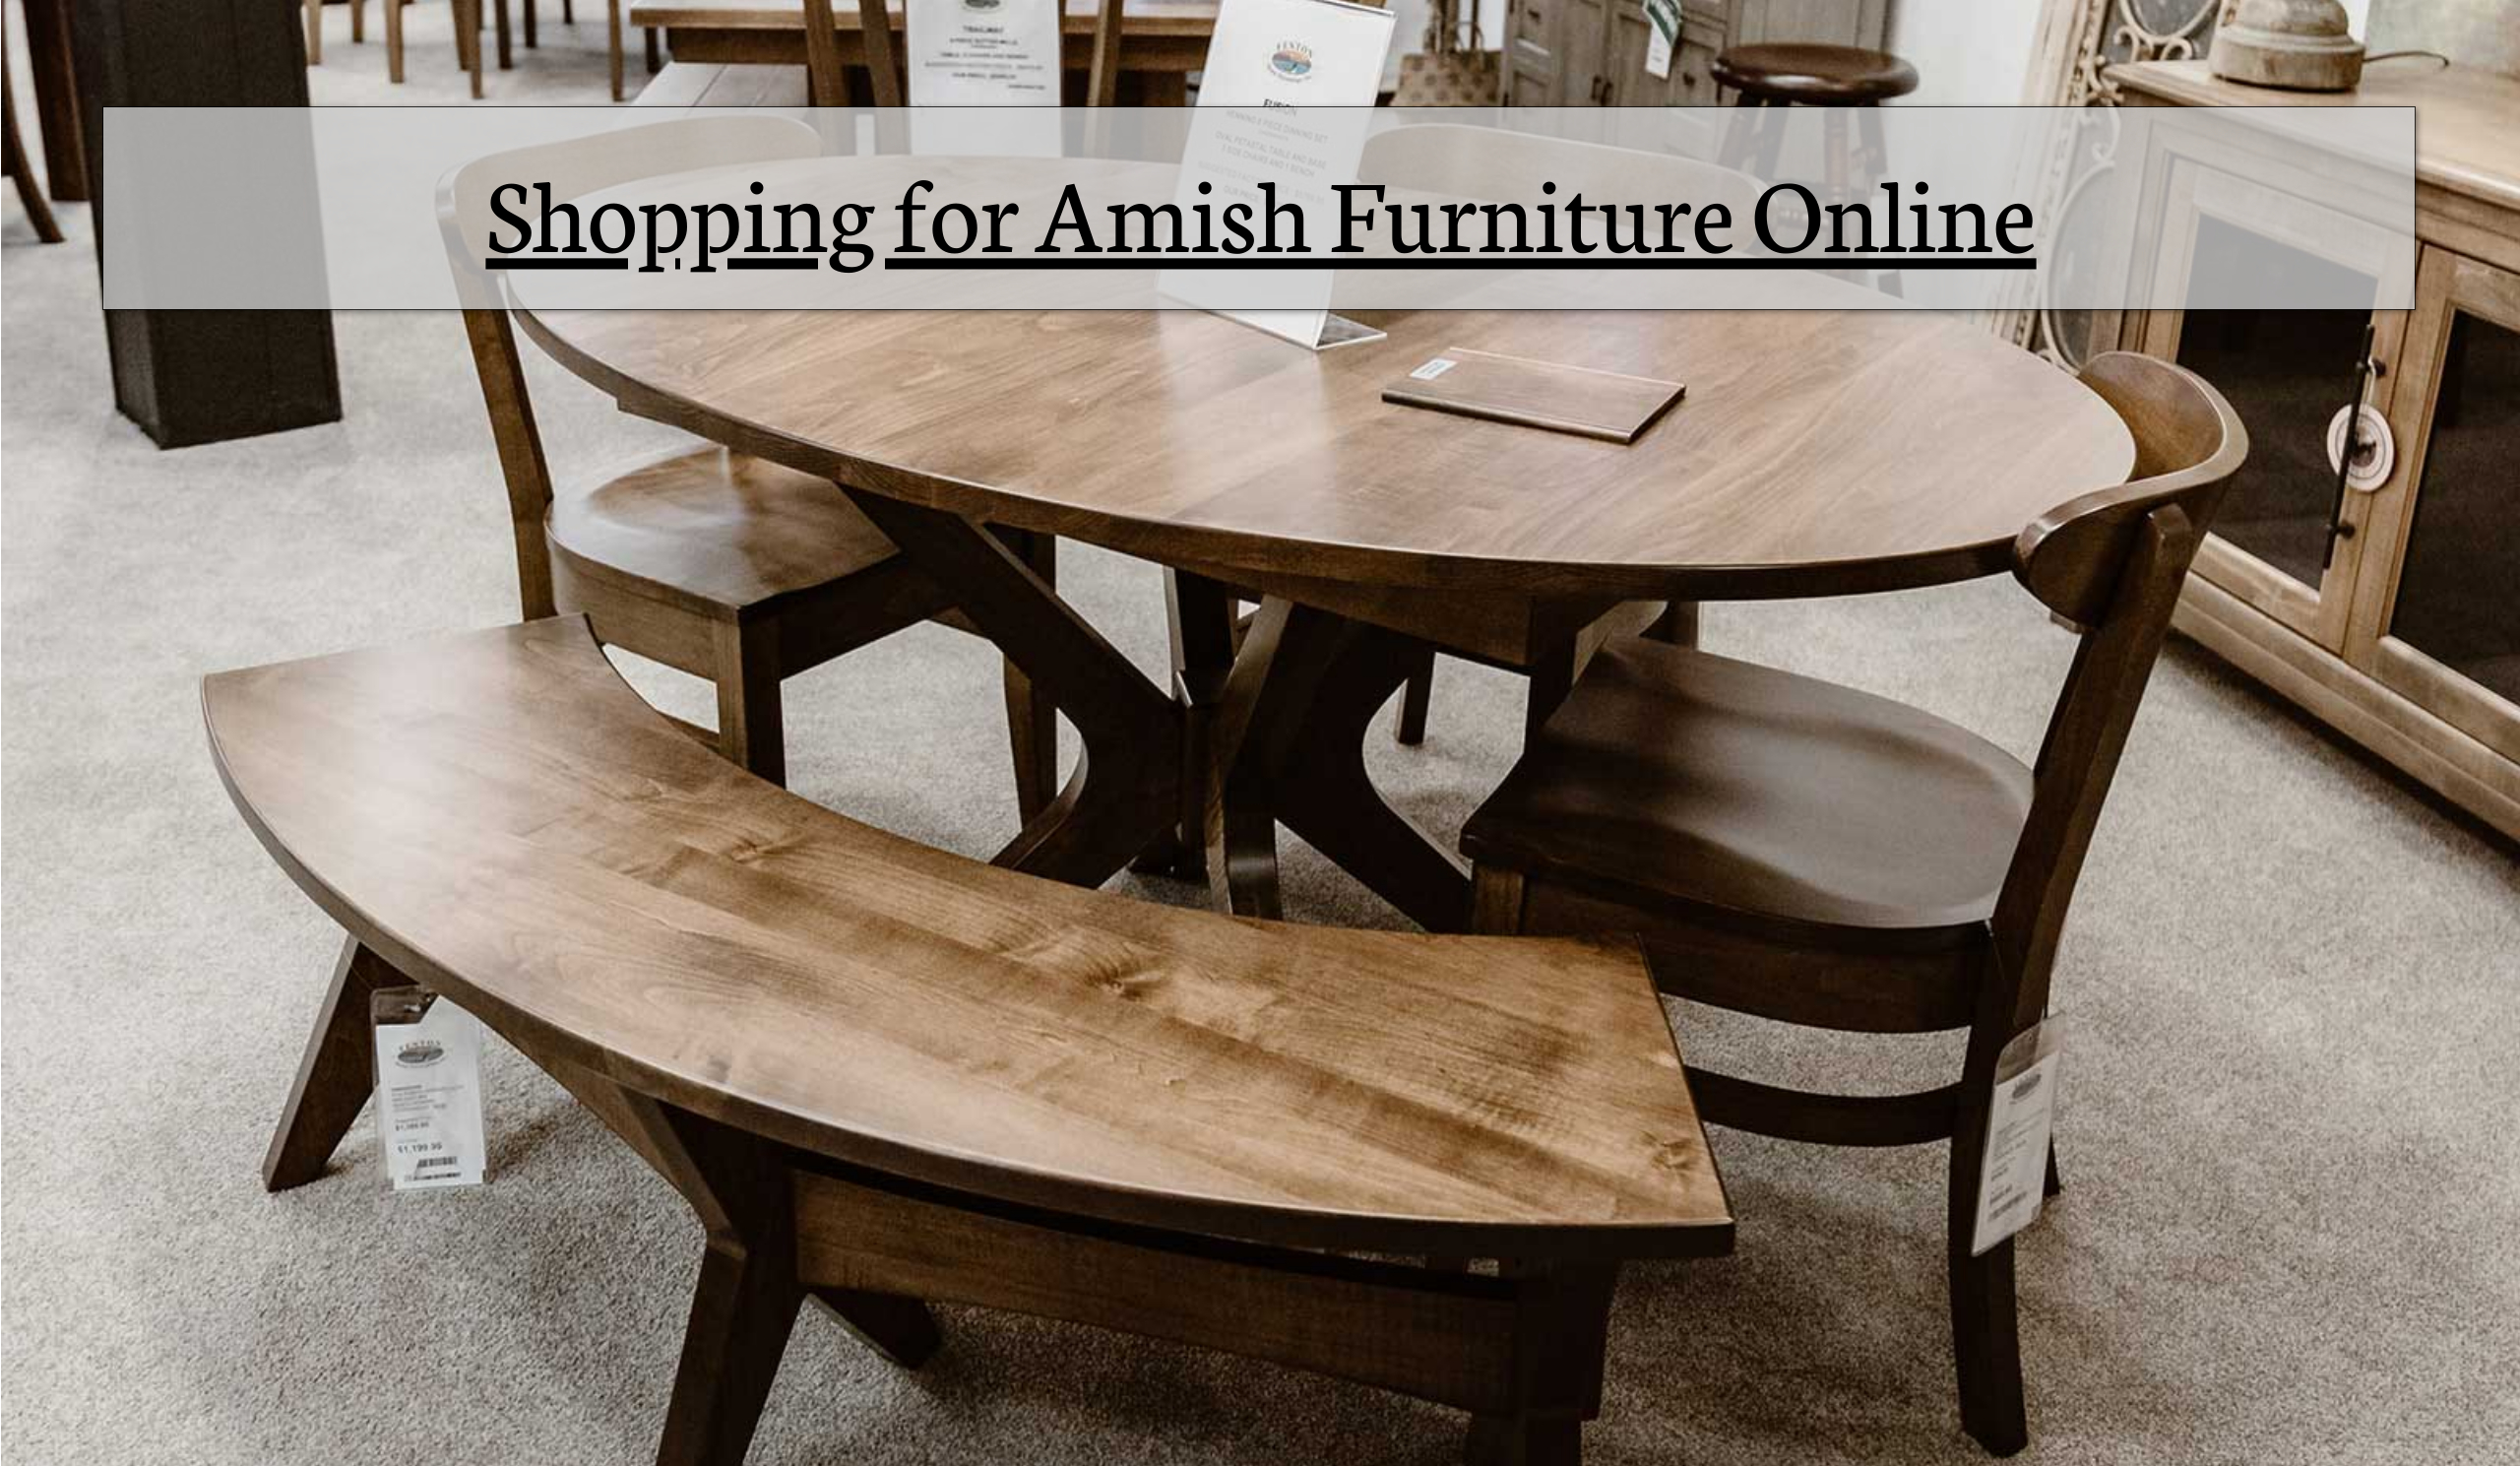 Shopping for the Best Value in Amish Furniture Online – July 2021